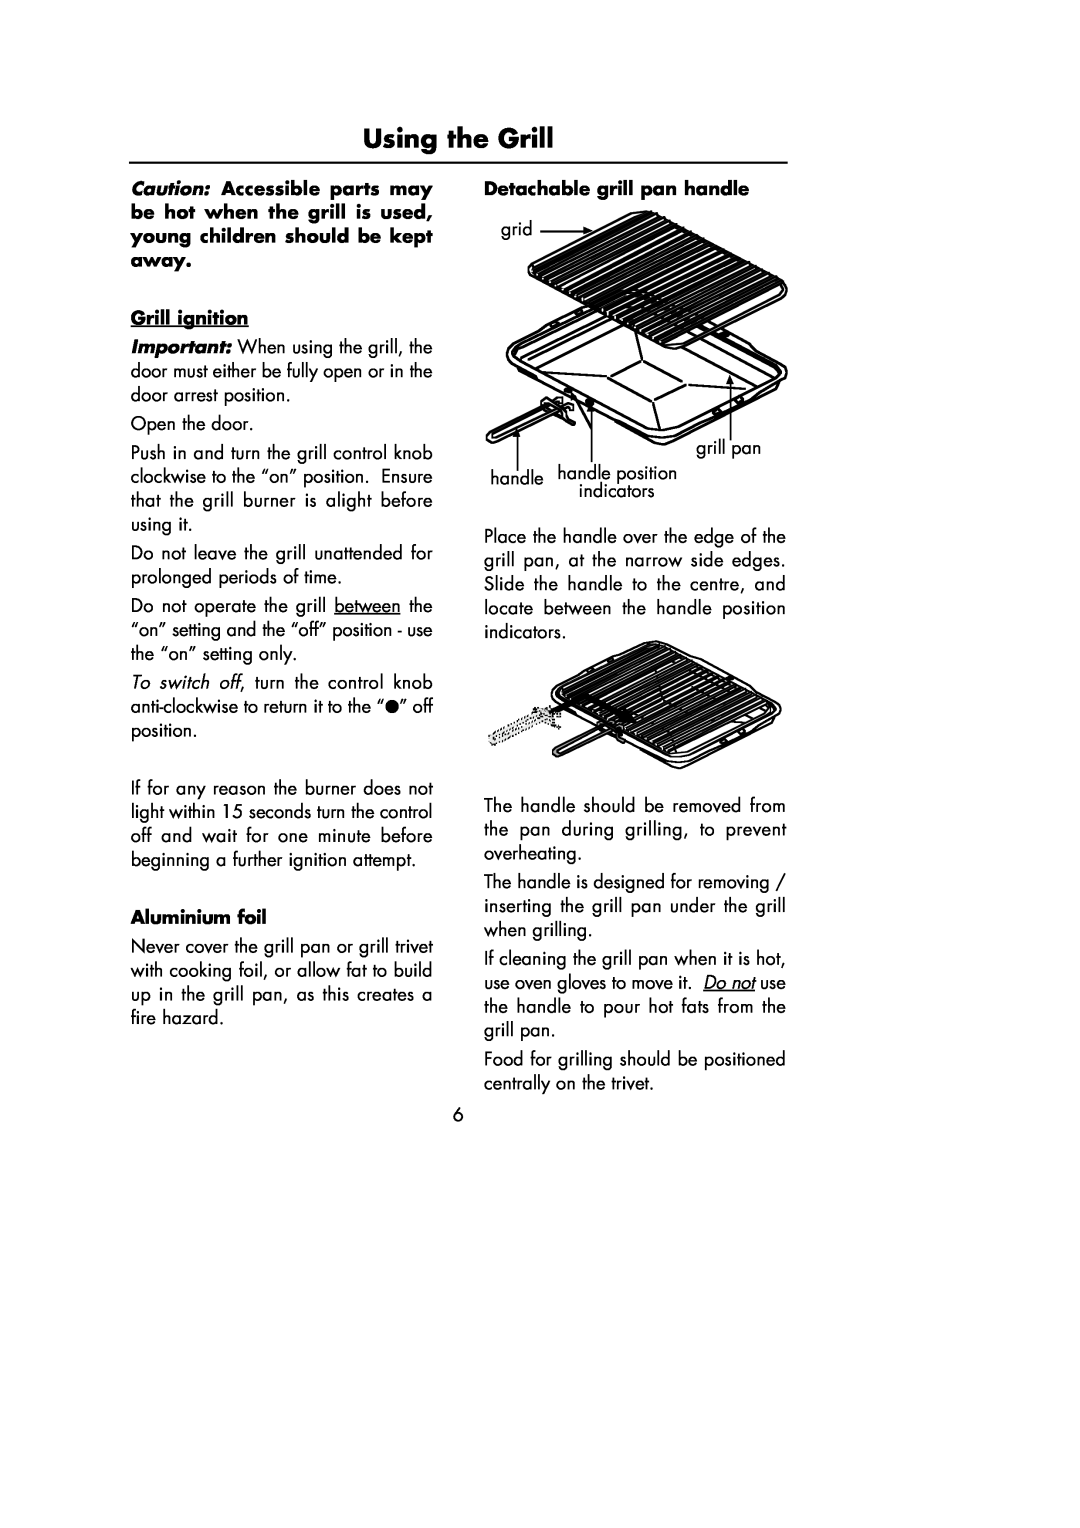 Hotpoint Oven manual Using the Grill, Grill ignition, Aluminium foil, Detachable grill pan handle 